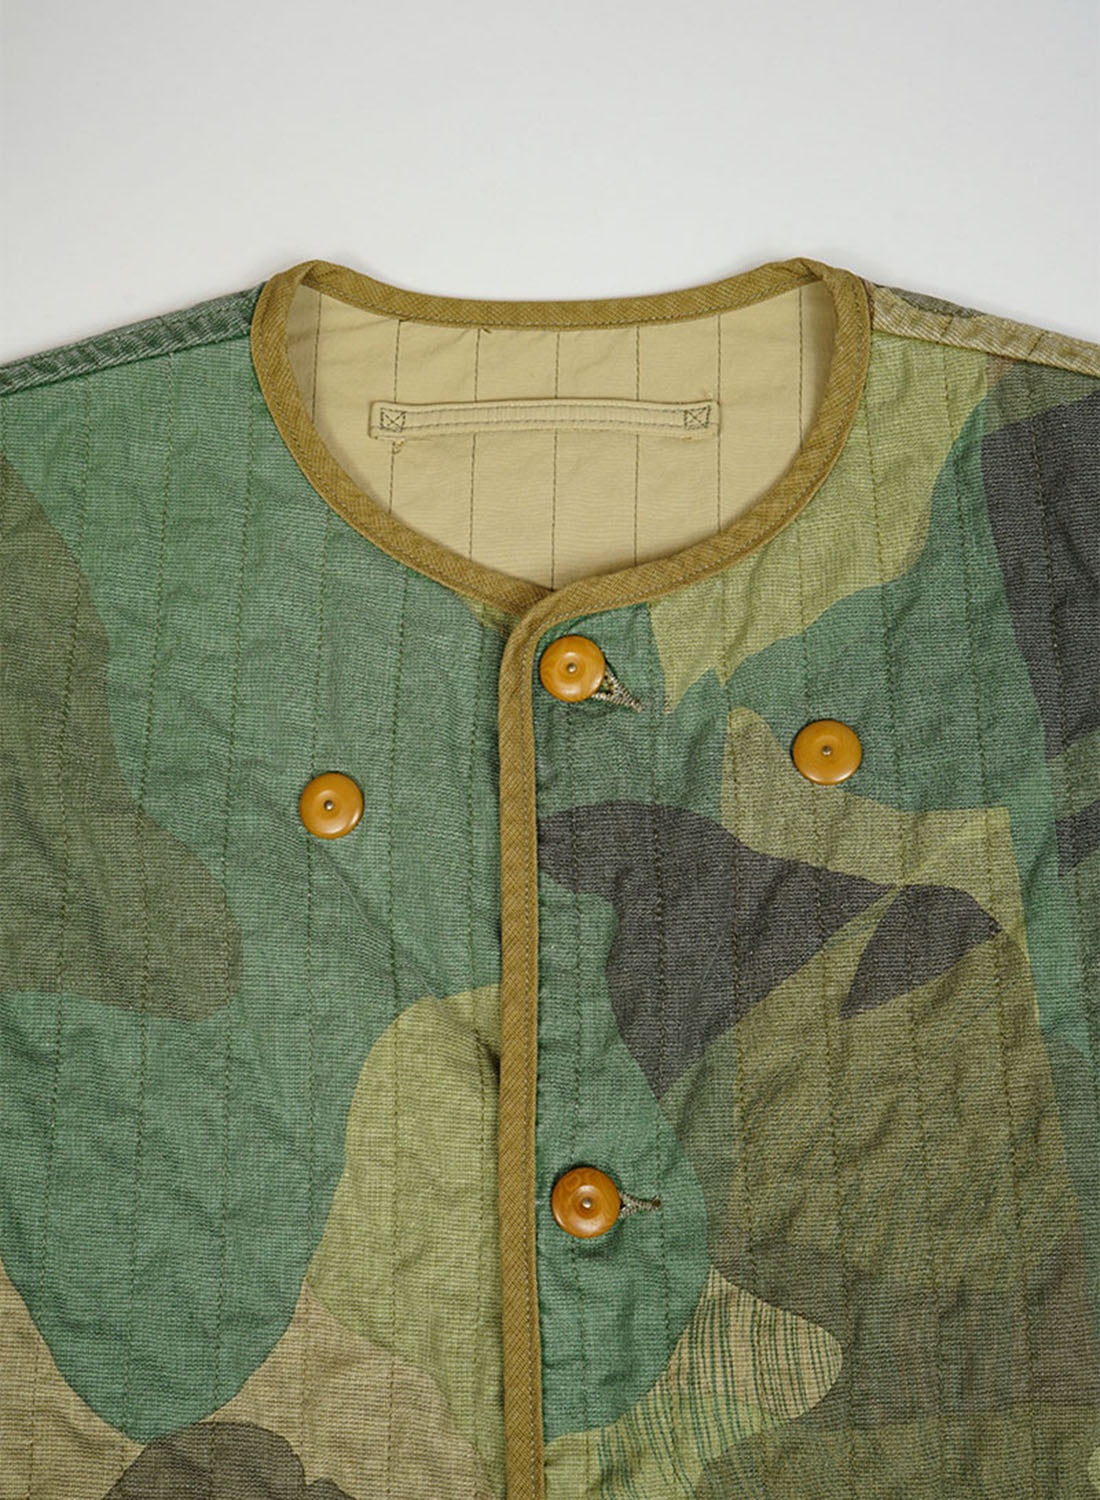 Army Vest Reversible Fade Camo in Green - 5